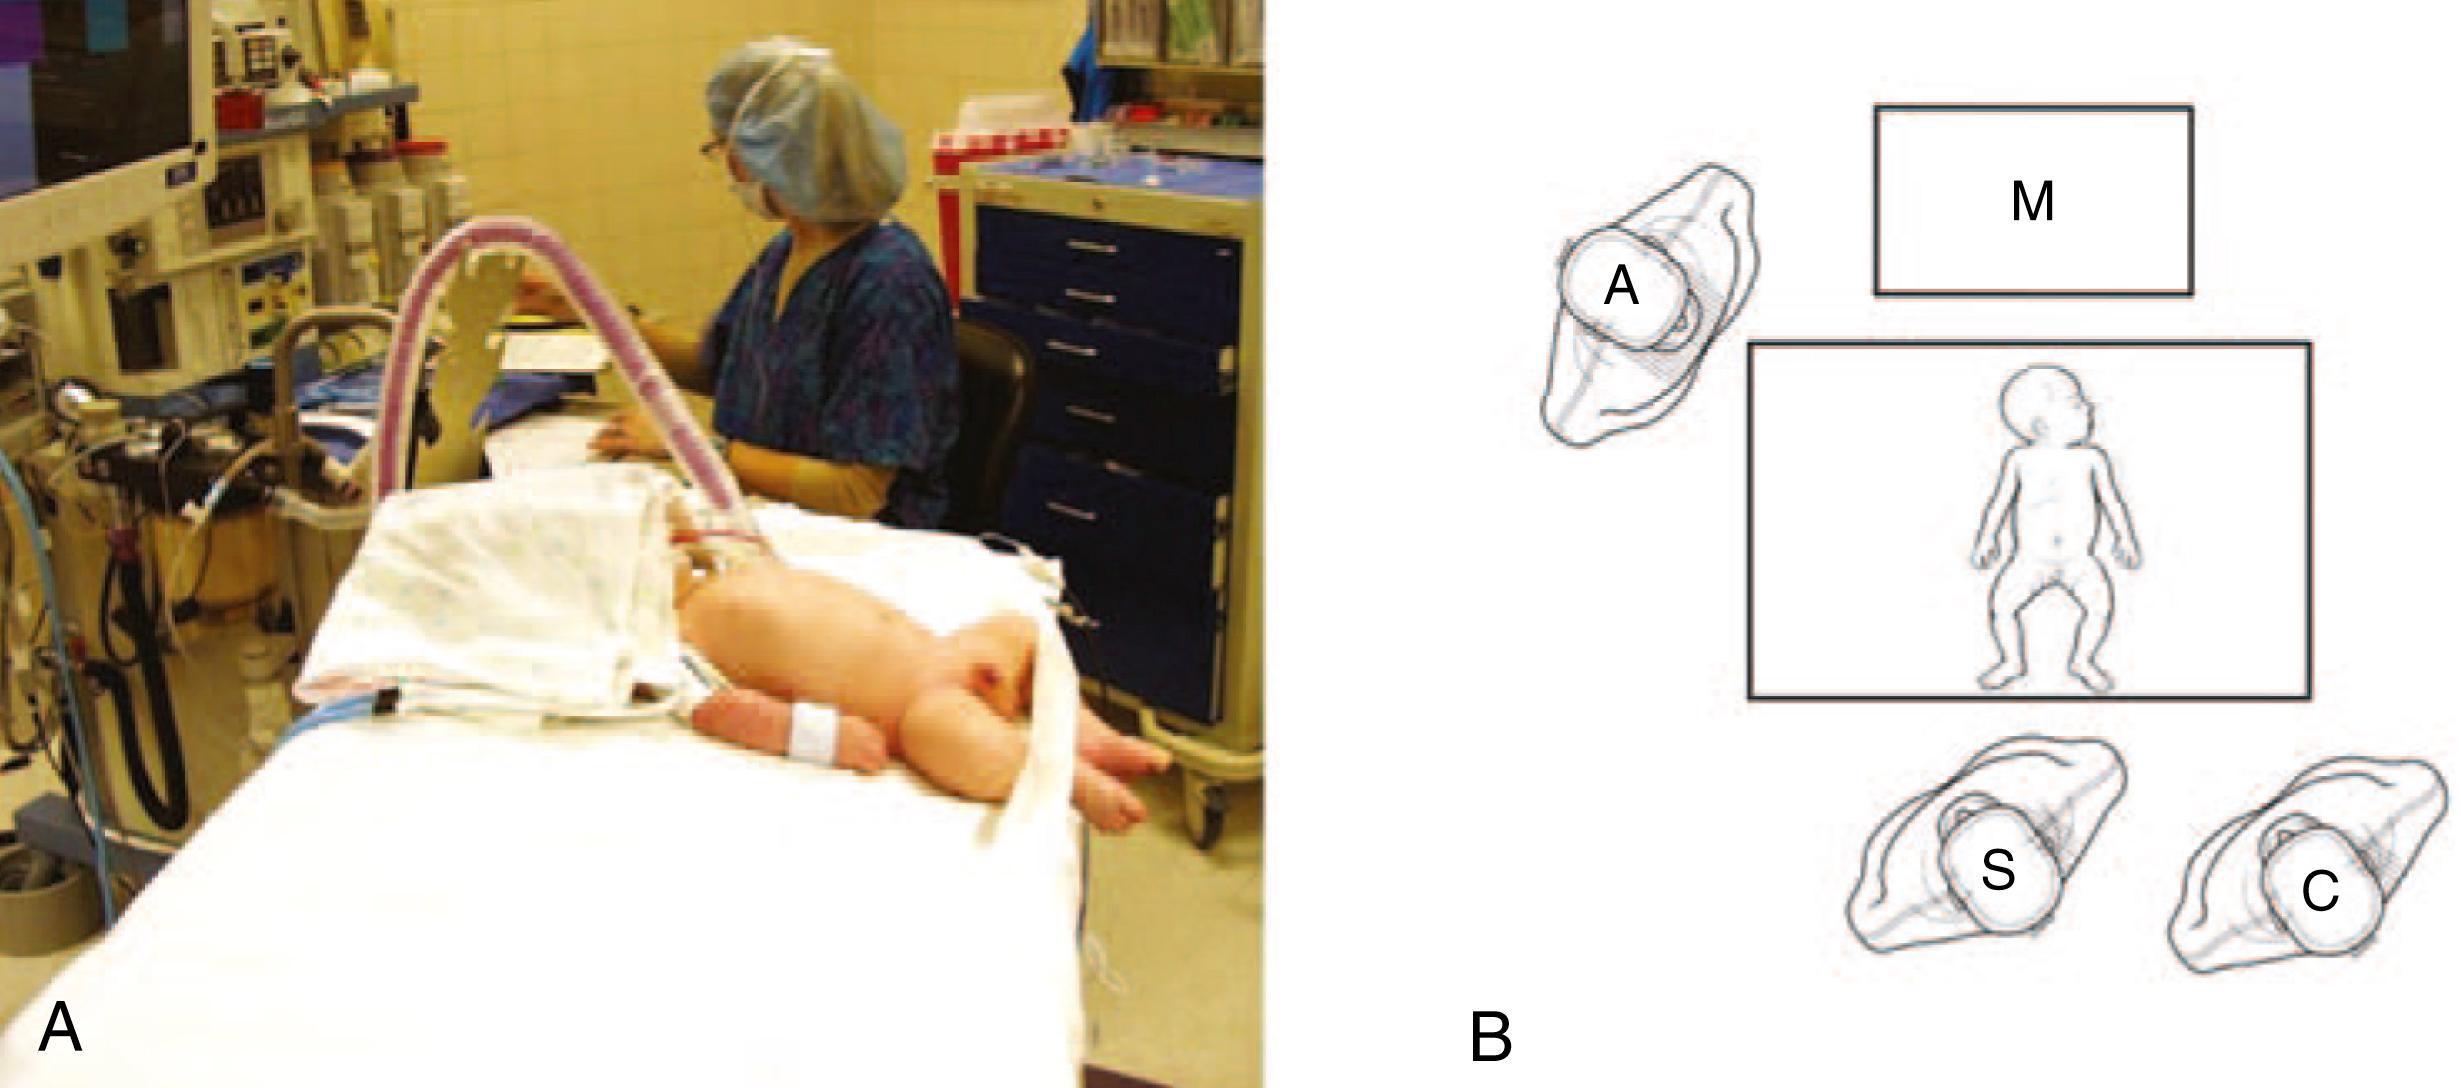 Fig. 5-1, A, The infant is positioned transversely across the operating table. A red rubber catheter has been inserted to distend the stomach following the myotomy. B, Operating personnel are depicted. The surgeon (S) stands at the foot of the patient. The camera holder (C) is usually positioned to the surgeon’s right. The monitor (M) is above the patient. A, anesthesiologist.